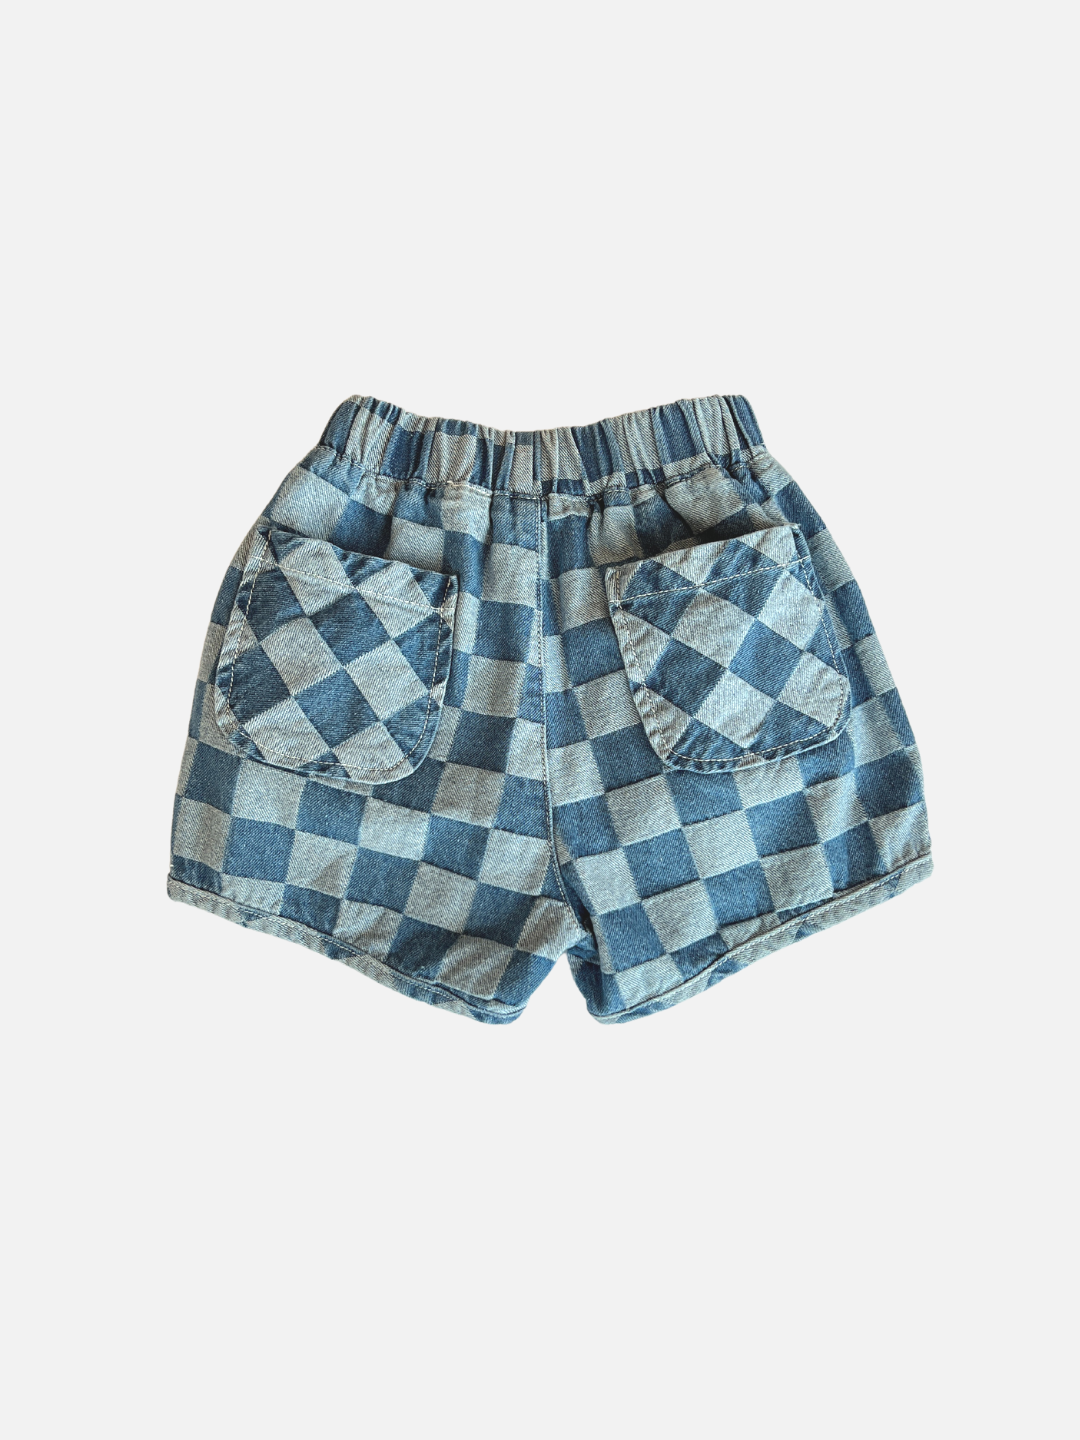 A pair of kids' checkerboard shorts in two shades of blue, back view showing pockets